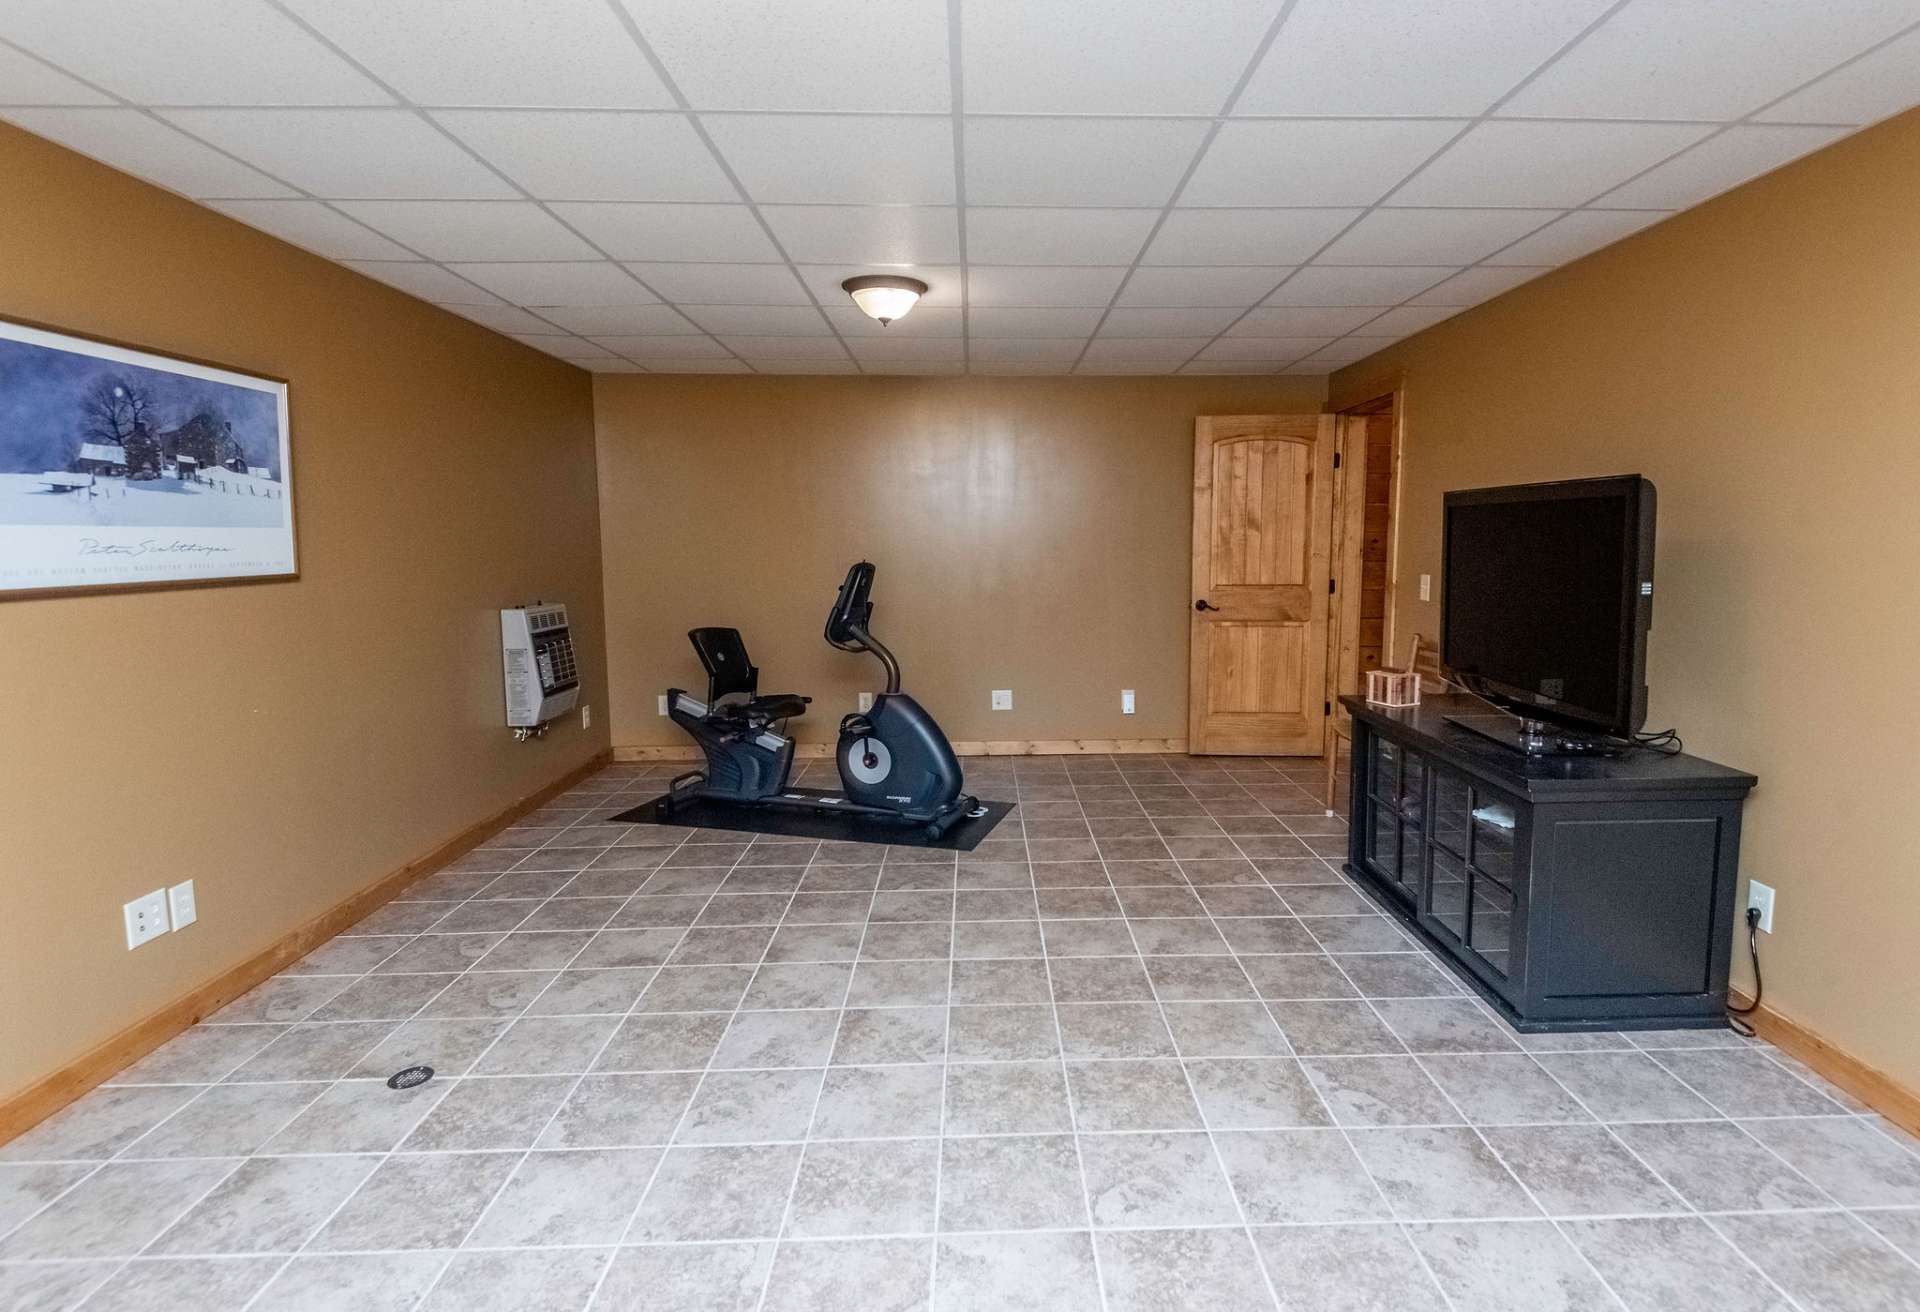 Lower level offers space for an exercise room, family room, office, or whatever your heart desires.